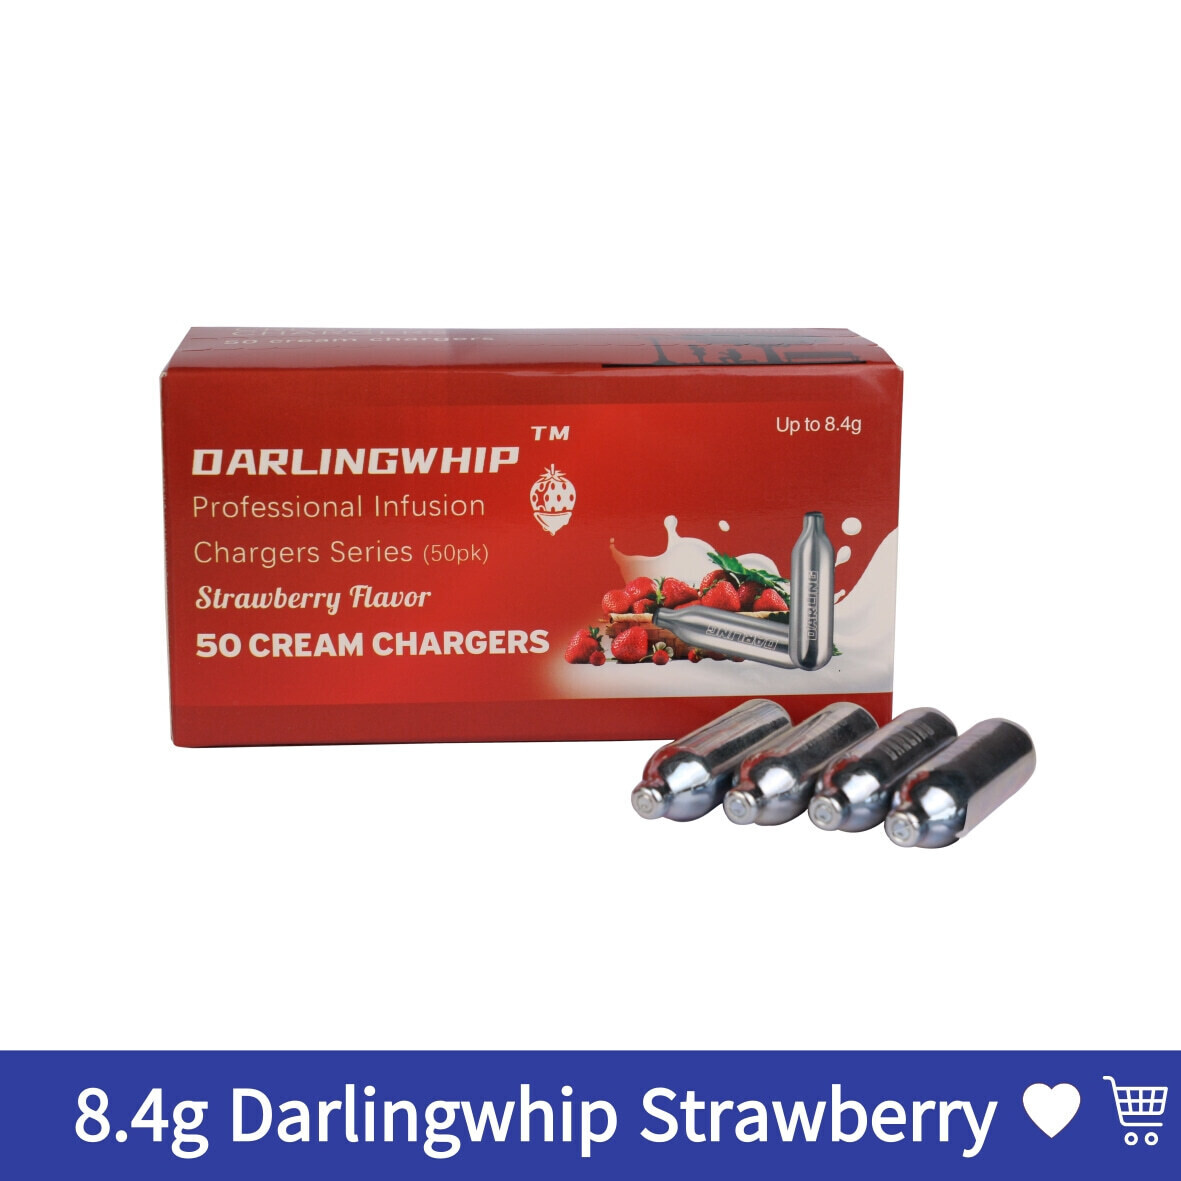 Cream Chargers: 8.4g Darlingwhip Strawberry Flavour